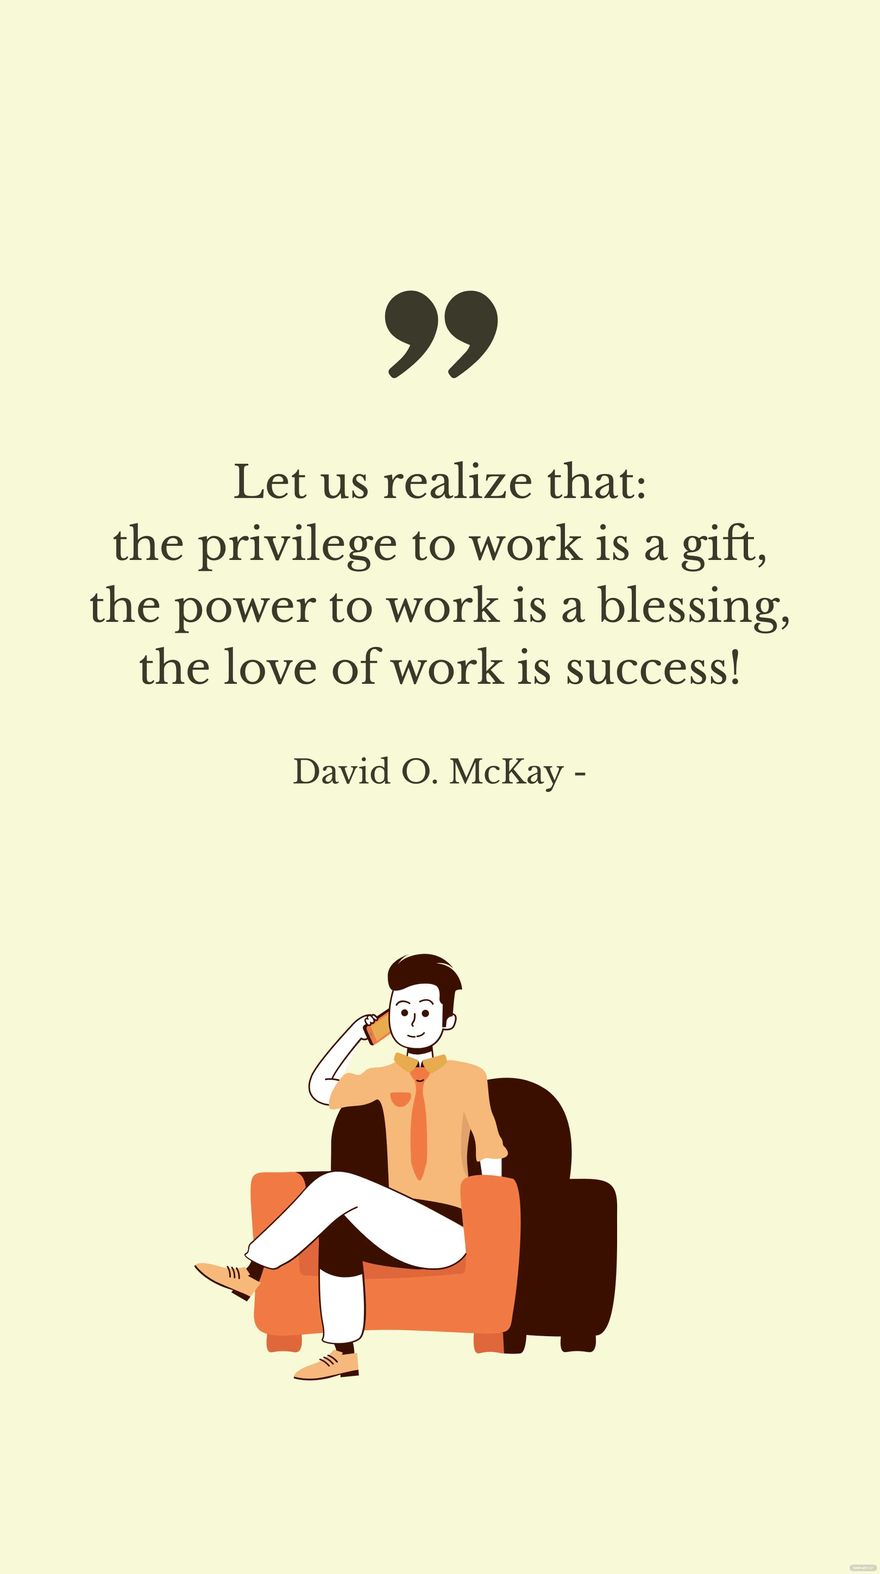 Free David O. McKay - Let us realize that: the privilege to work is a gift, the power to work is a blessing, the love of work is success! in JPG